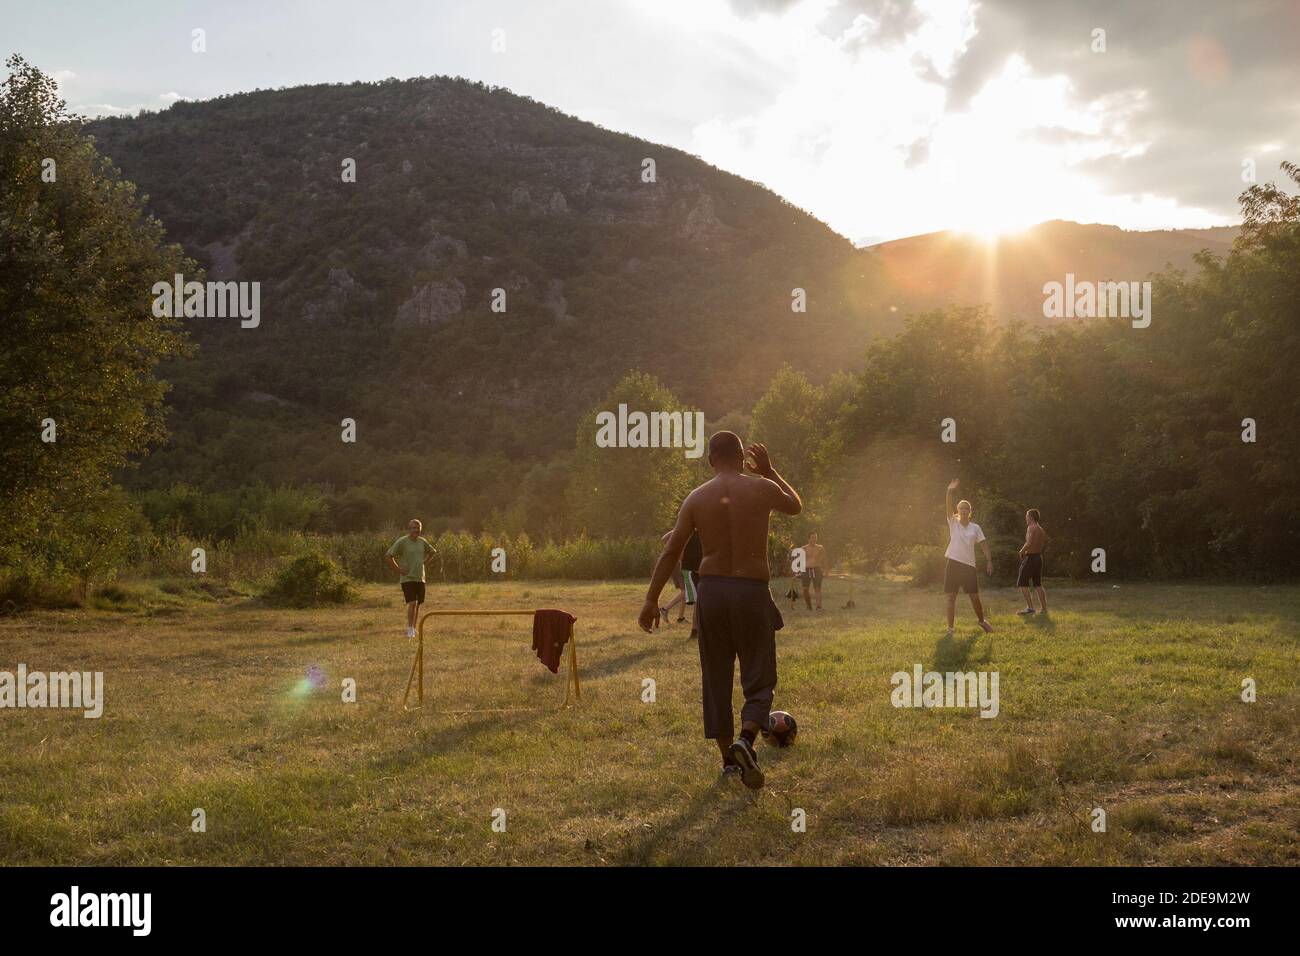 SUVA PLANINA, SERBIA - SEPTEMBER 3, 2016: People, mostly men, playing soccer football in a countryside field at dusk in Suva planina, one of the main Stock Photo